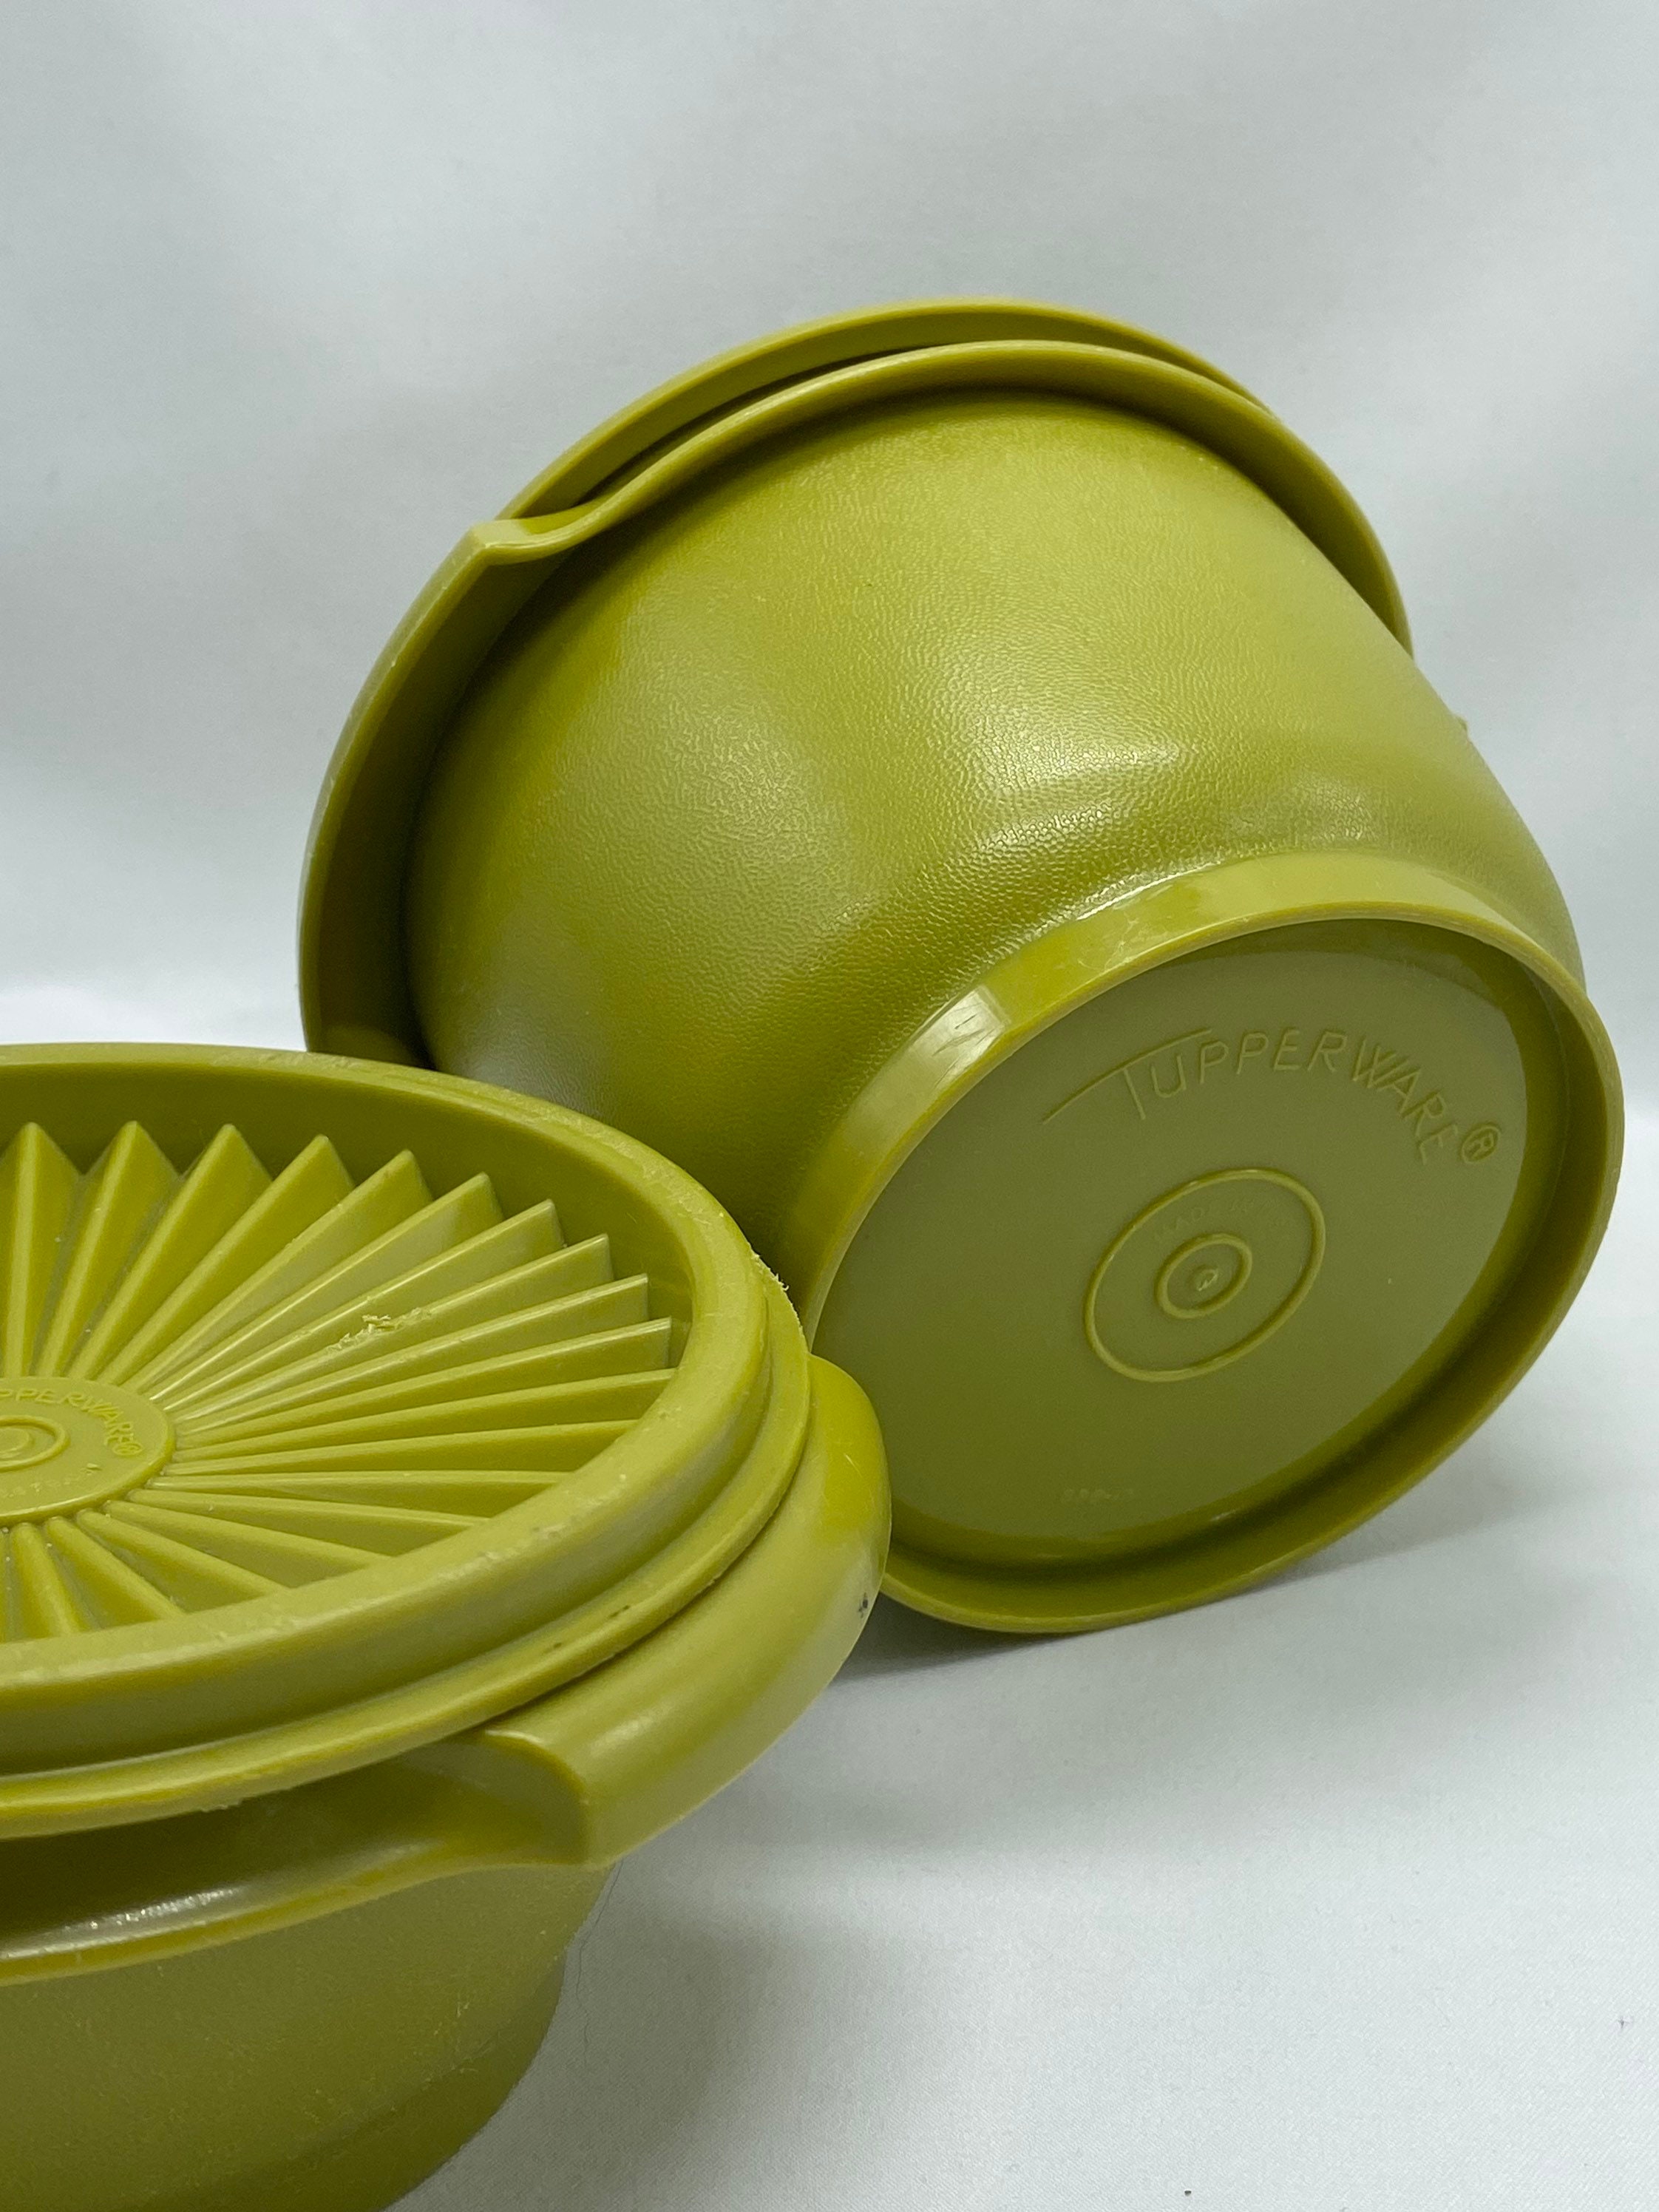 Vintage NEW Avocado Green Flower Pattern Tupperware Containers w/ Labe –  Shop Cool Vintage Decor